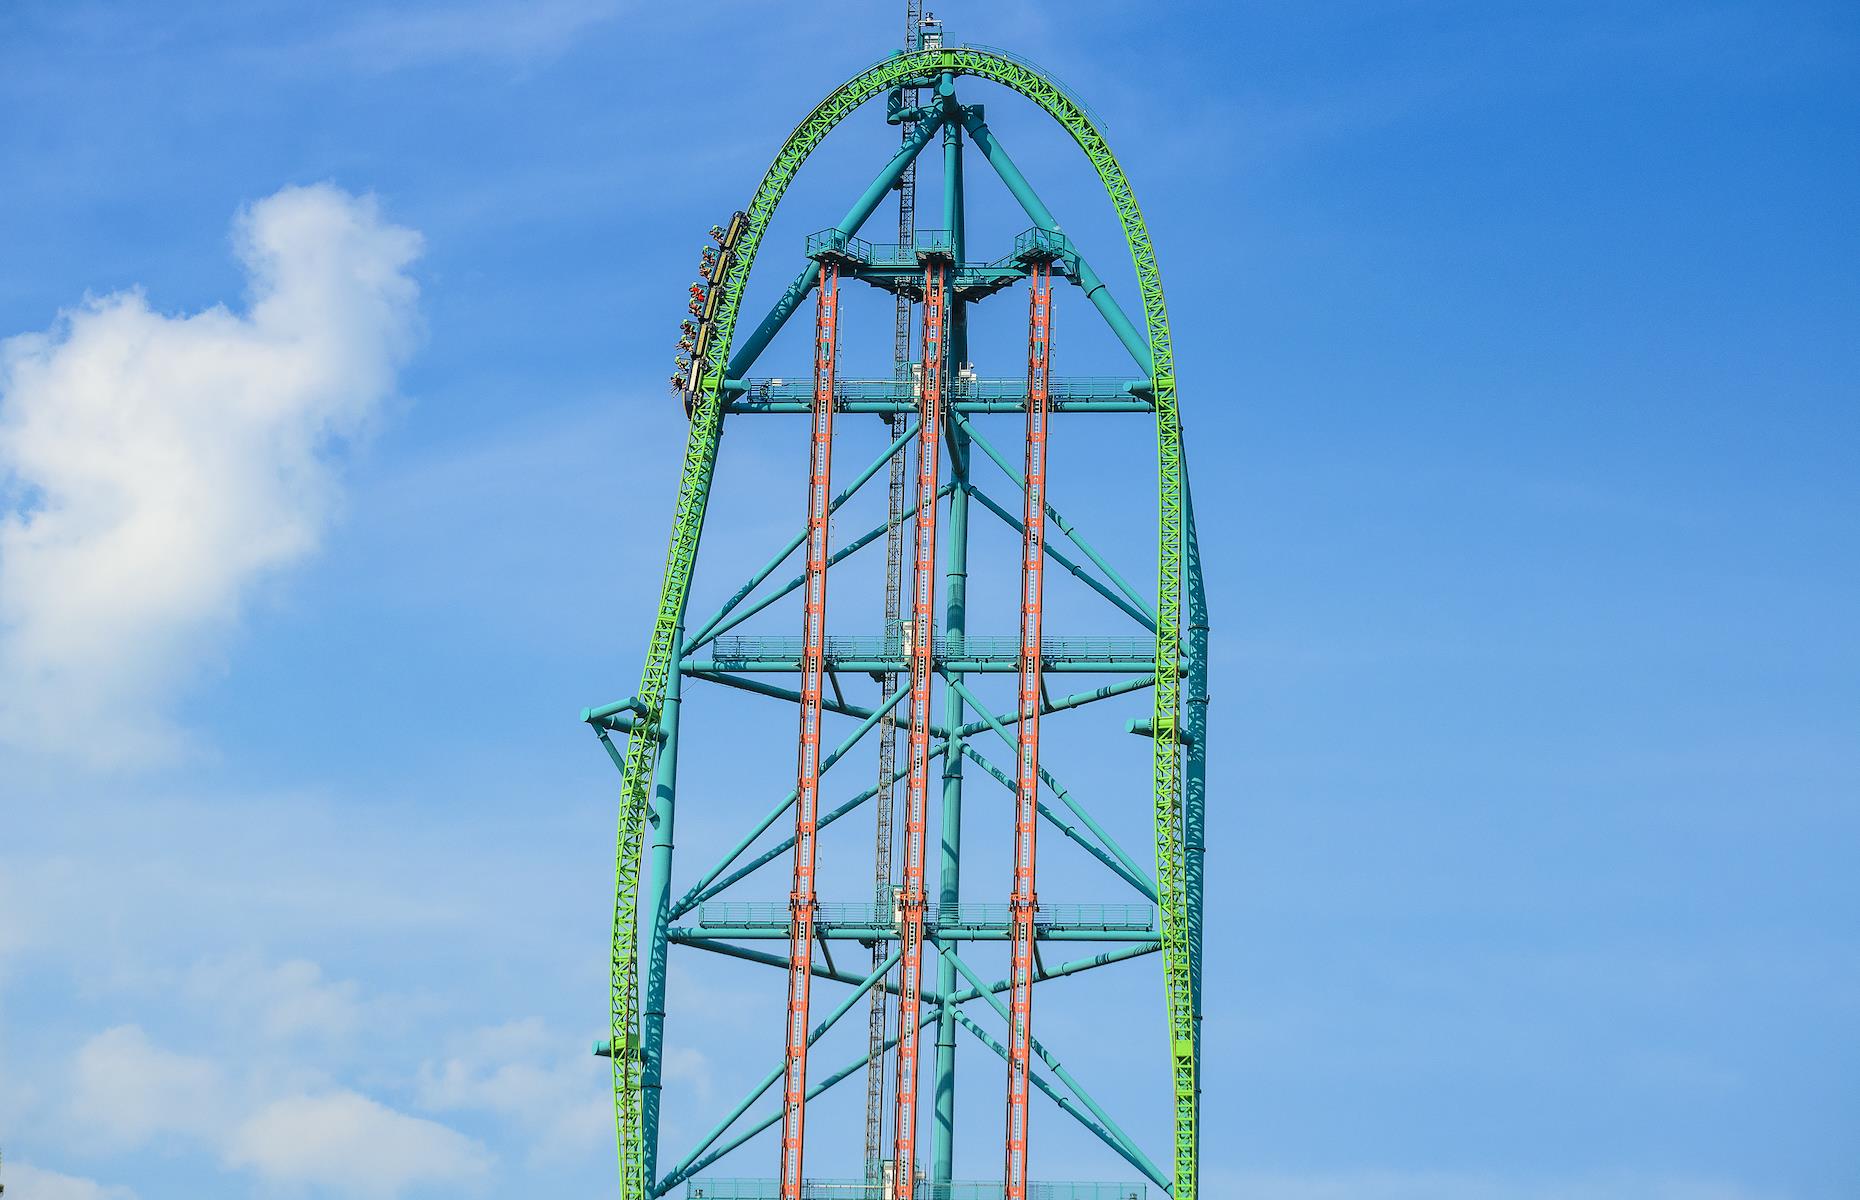 <p>Test your nerves at New Jersey's squeal-inducing Six Flags Great Adventure theme park. It's home to the record busting Kingda Ka, officially the tallest roller coaster in the world thanks to its inverted, U-shaped loop, which shoots up to 456 feet (139m), or around 45 stories. It's also the fastest roller coaster in North America, with riders whizzing from 0 to 128 miles per hour (206km/h) in just 3.5 seconds, before plummeting down towards the ground in a 270-degree spiral. </p>